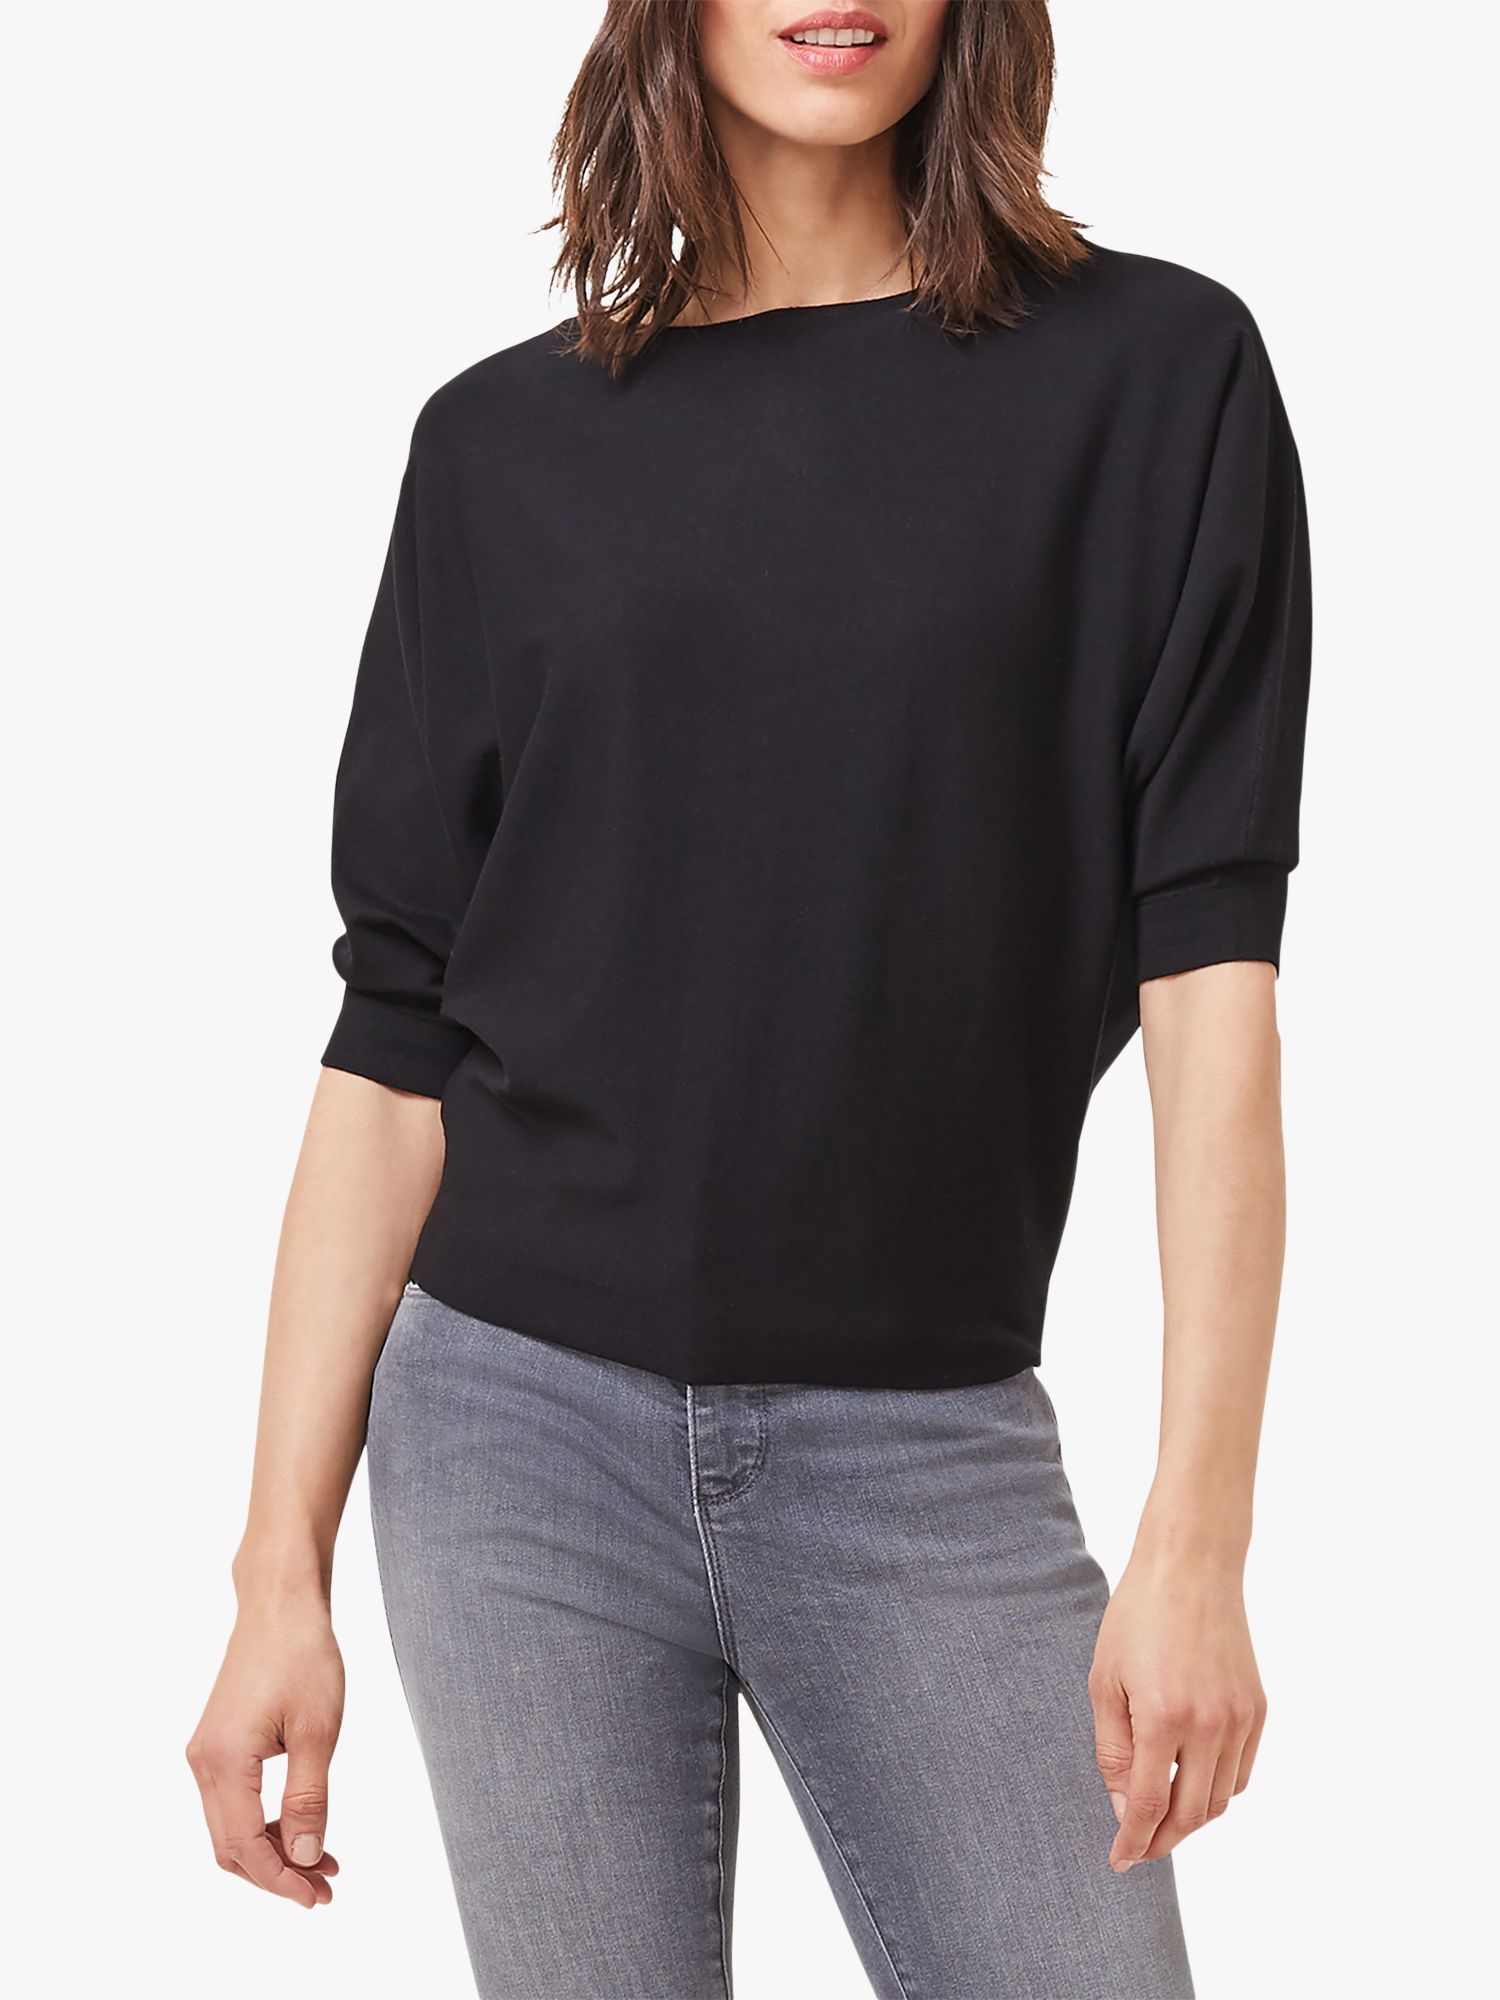 Phase Eight Cristine Batwing Knit Top, Black at John Lewis & Partners